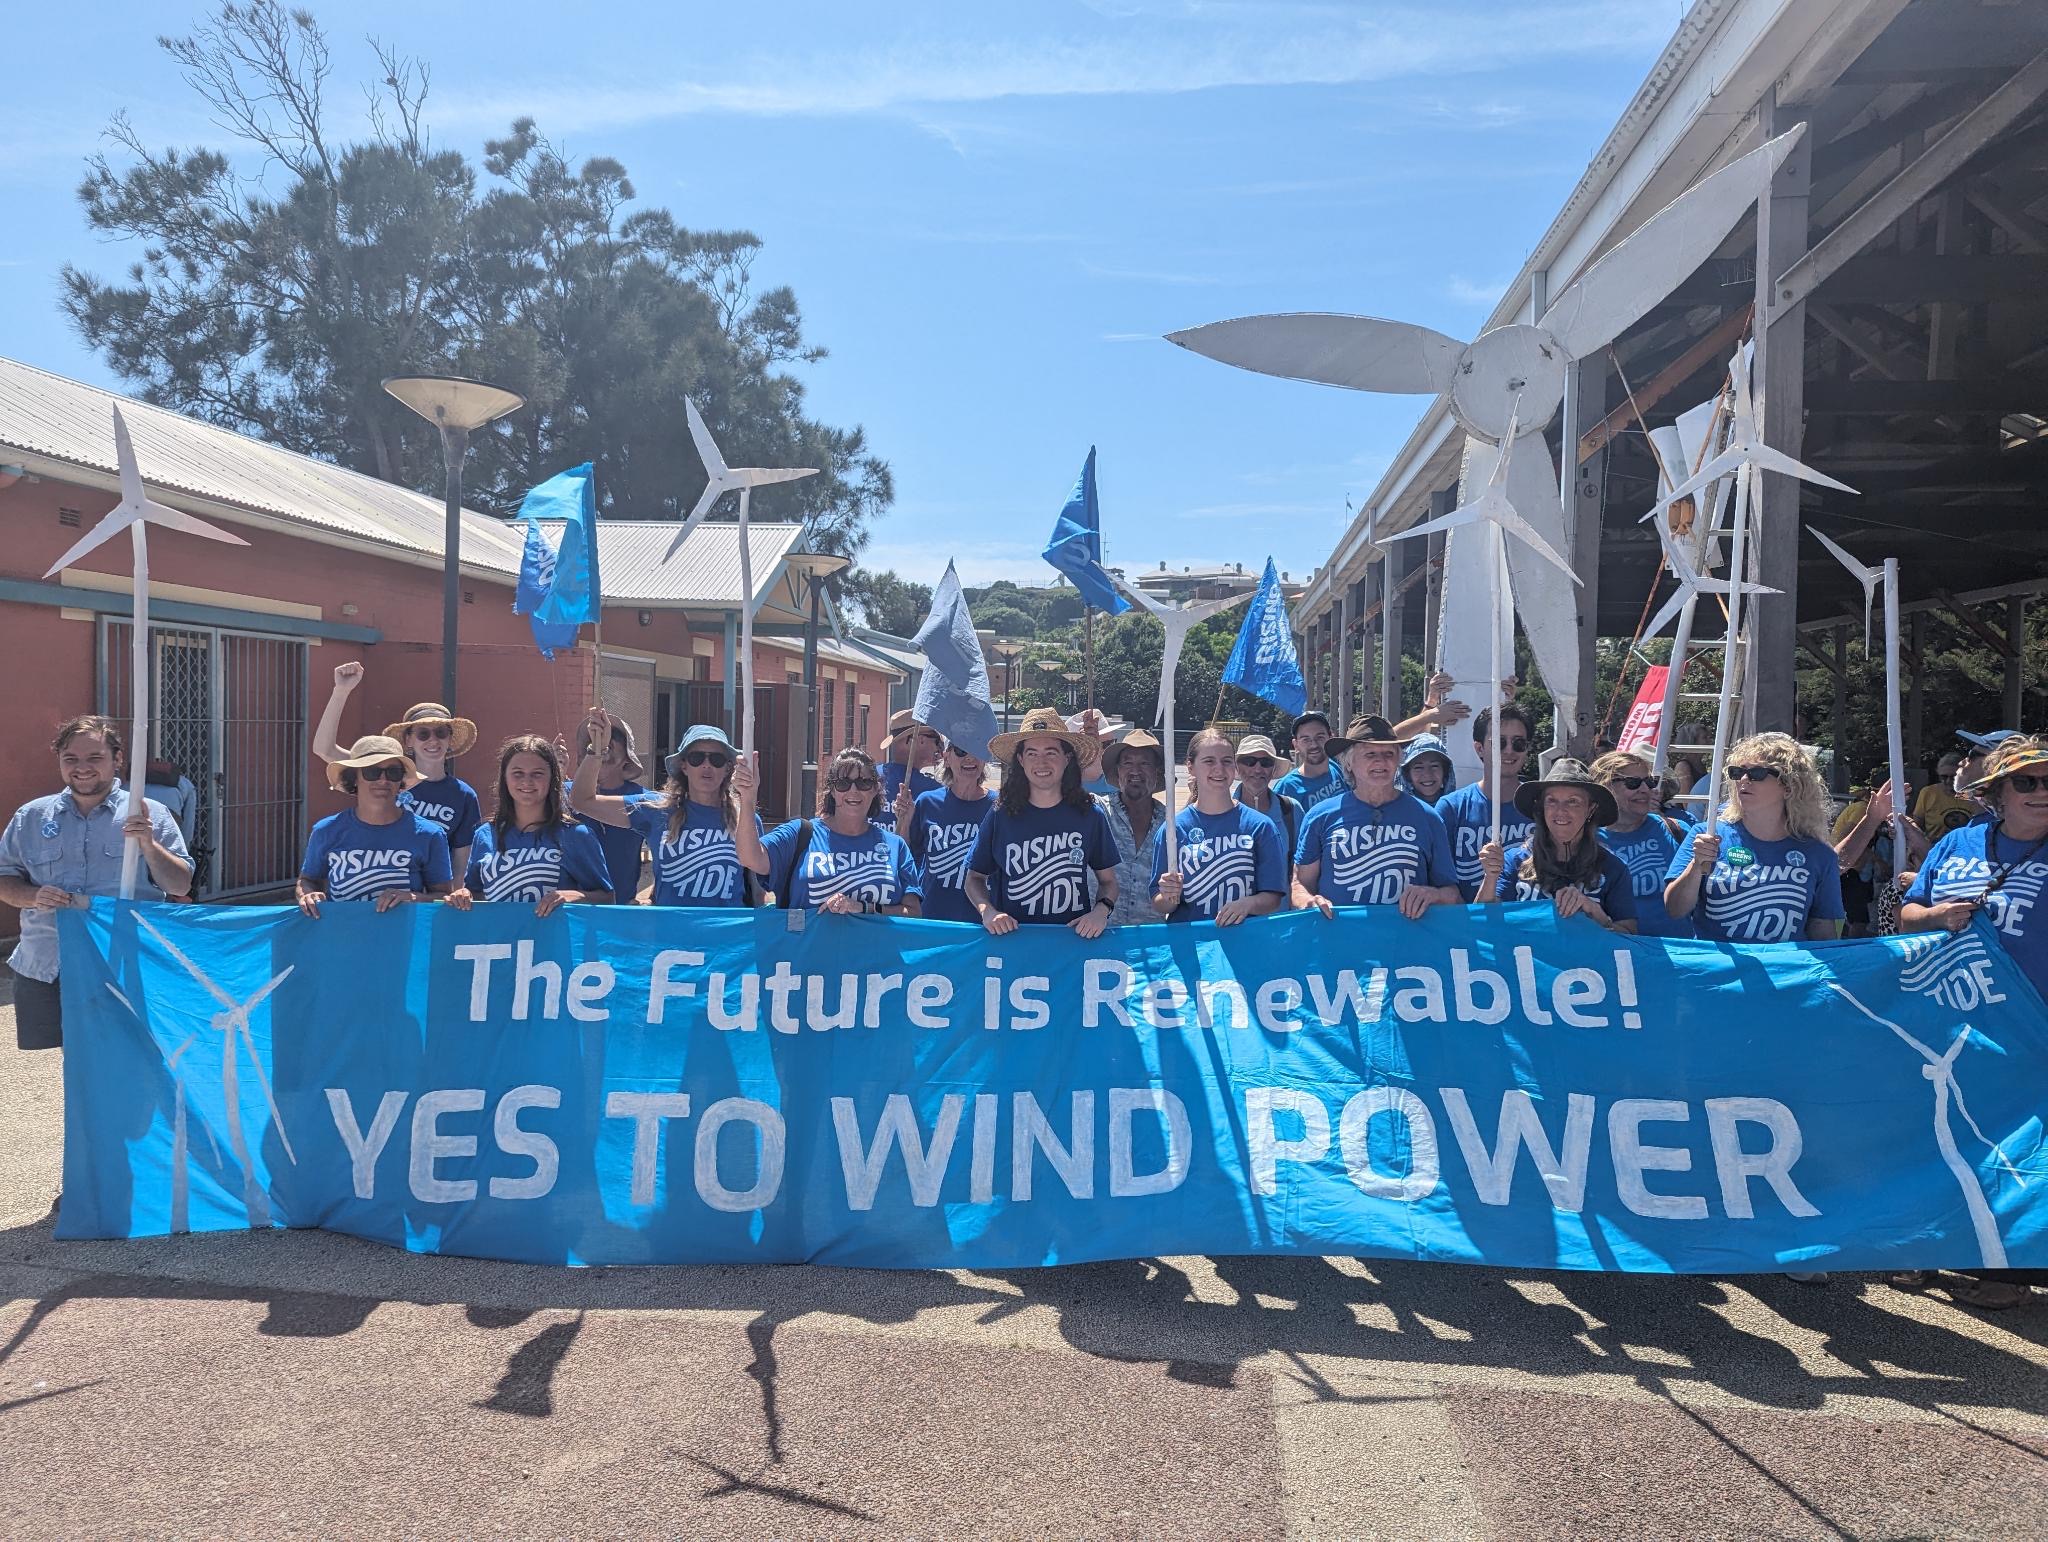 Climate action group Rising Tide has strongly supported the offshore wind project.